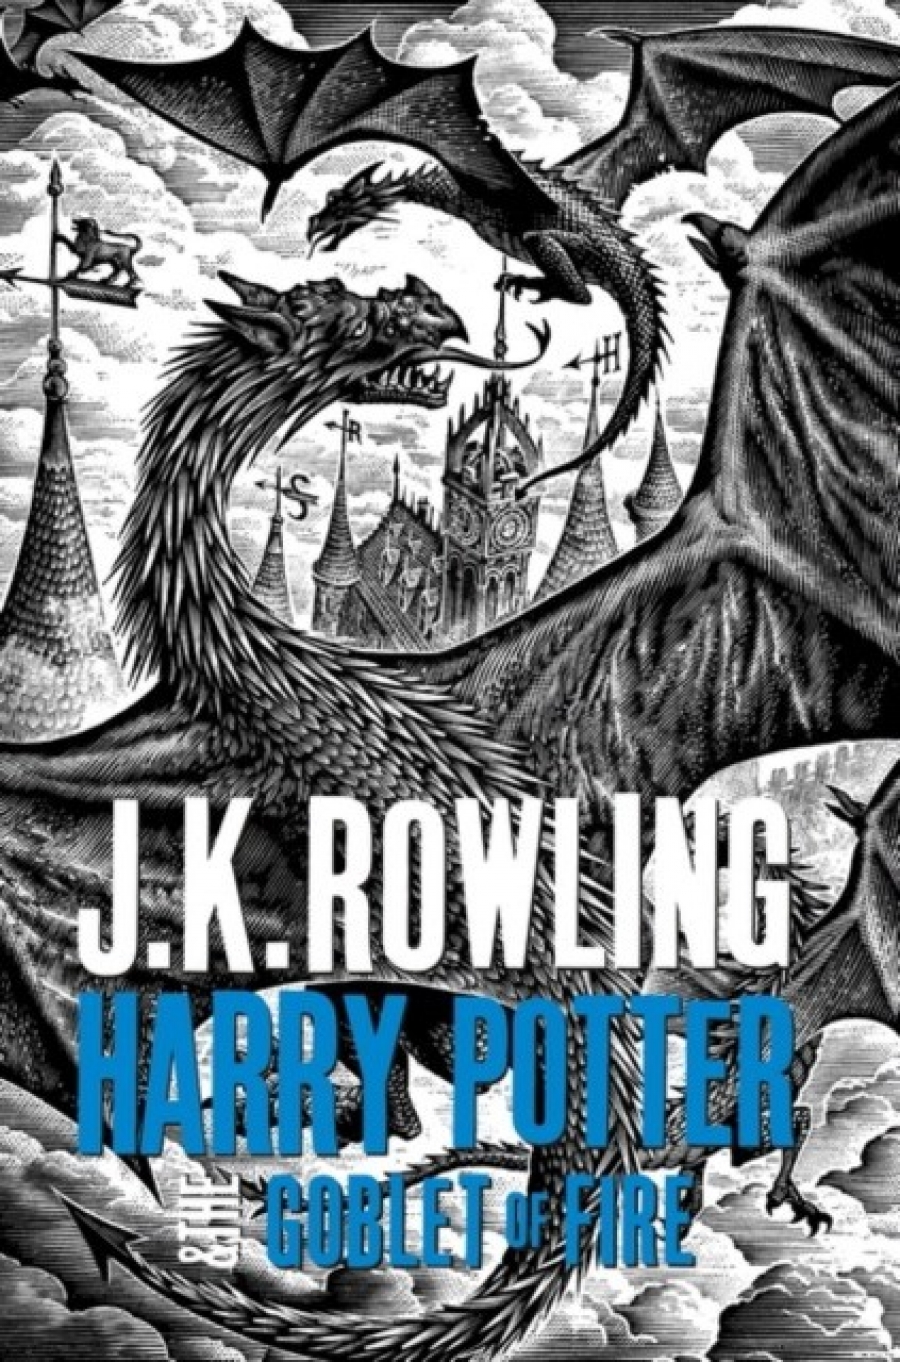 Rowling J.K. Harry Potter and the Goblet of Fire HB 